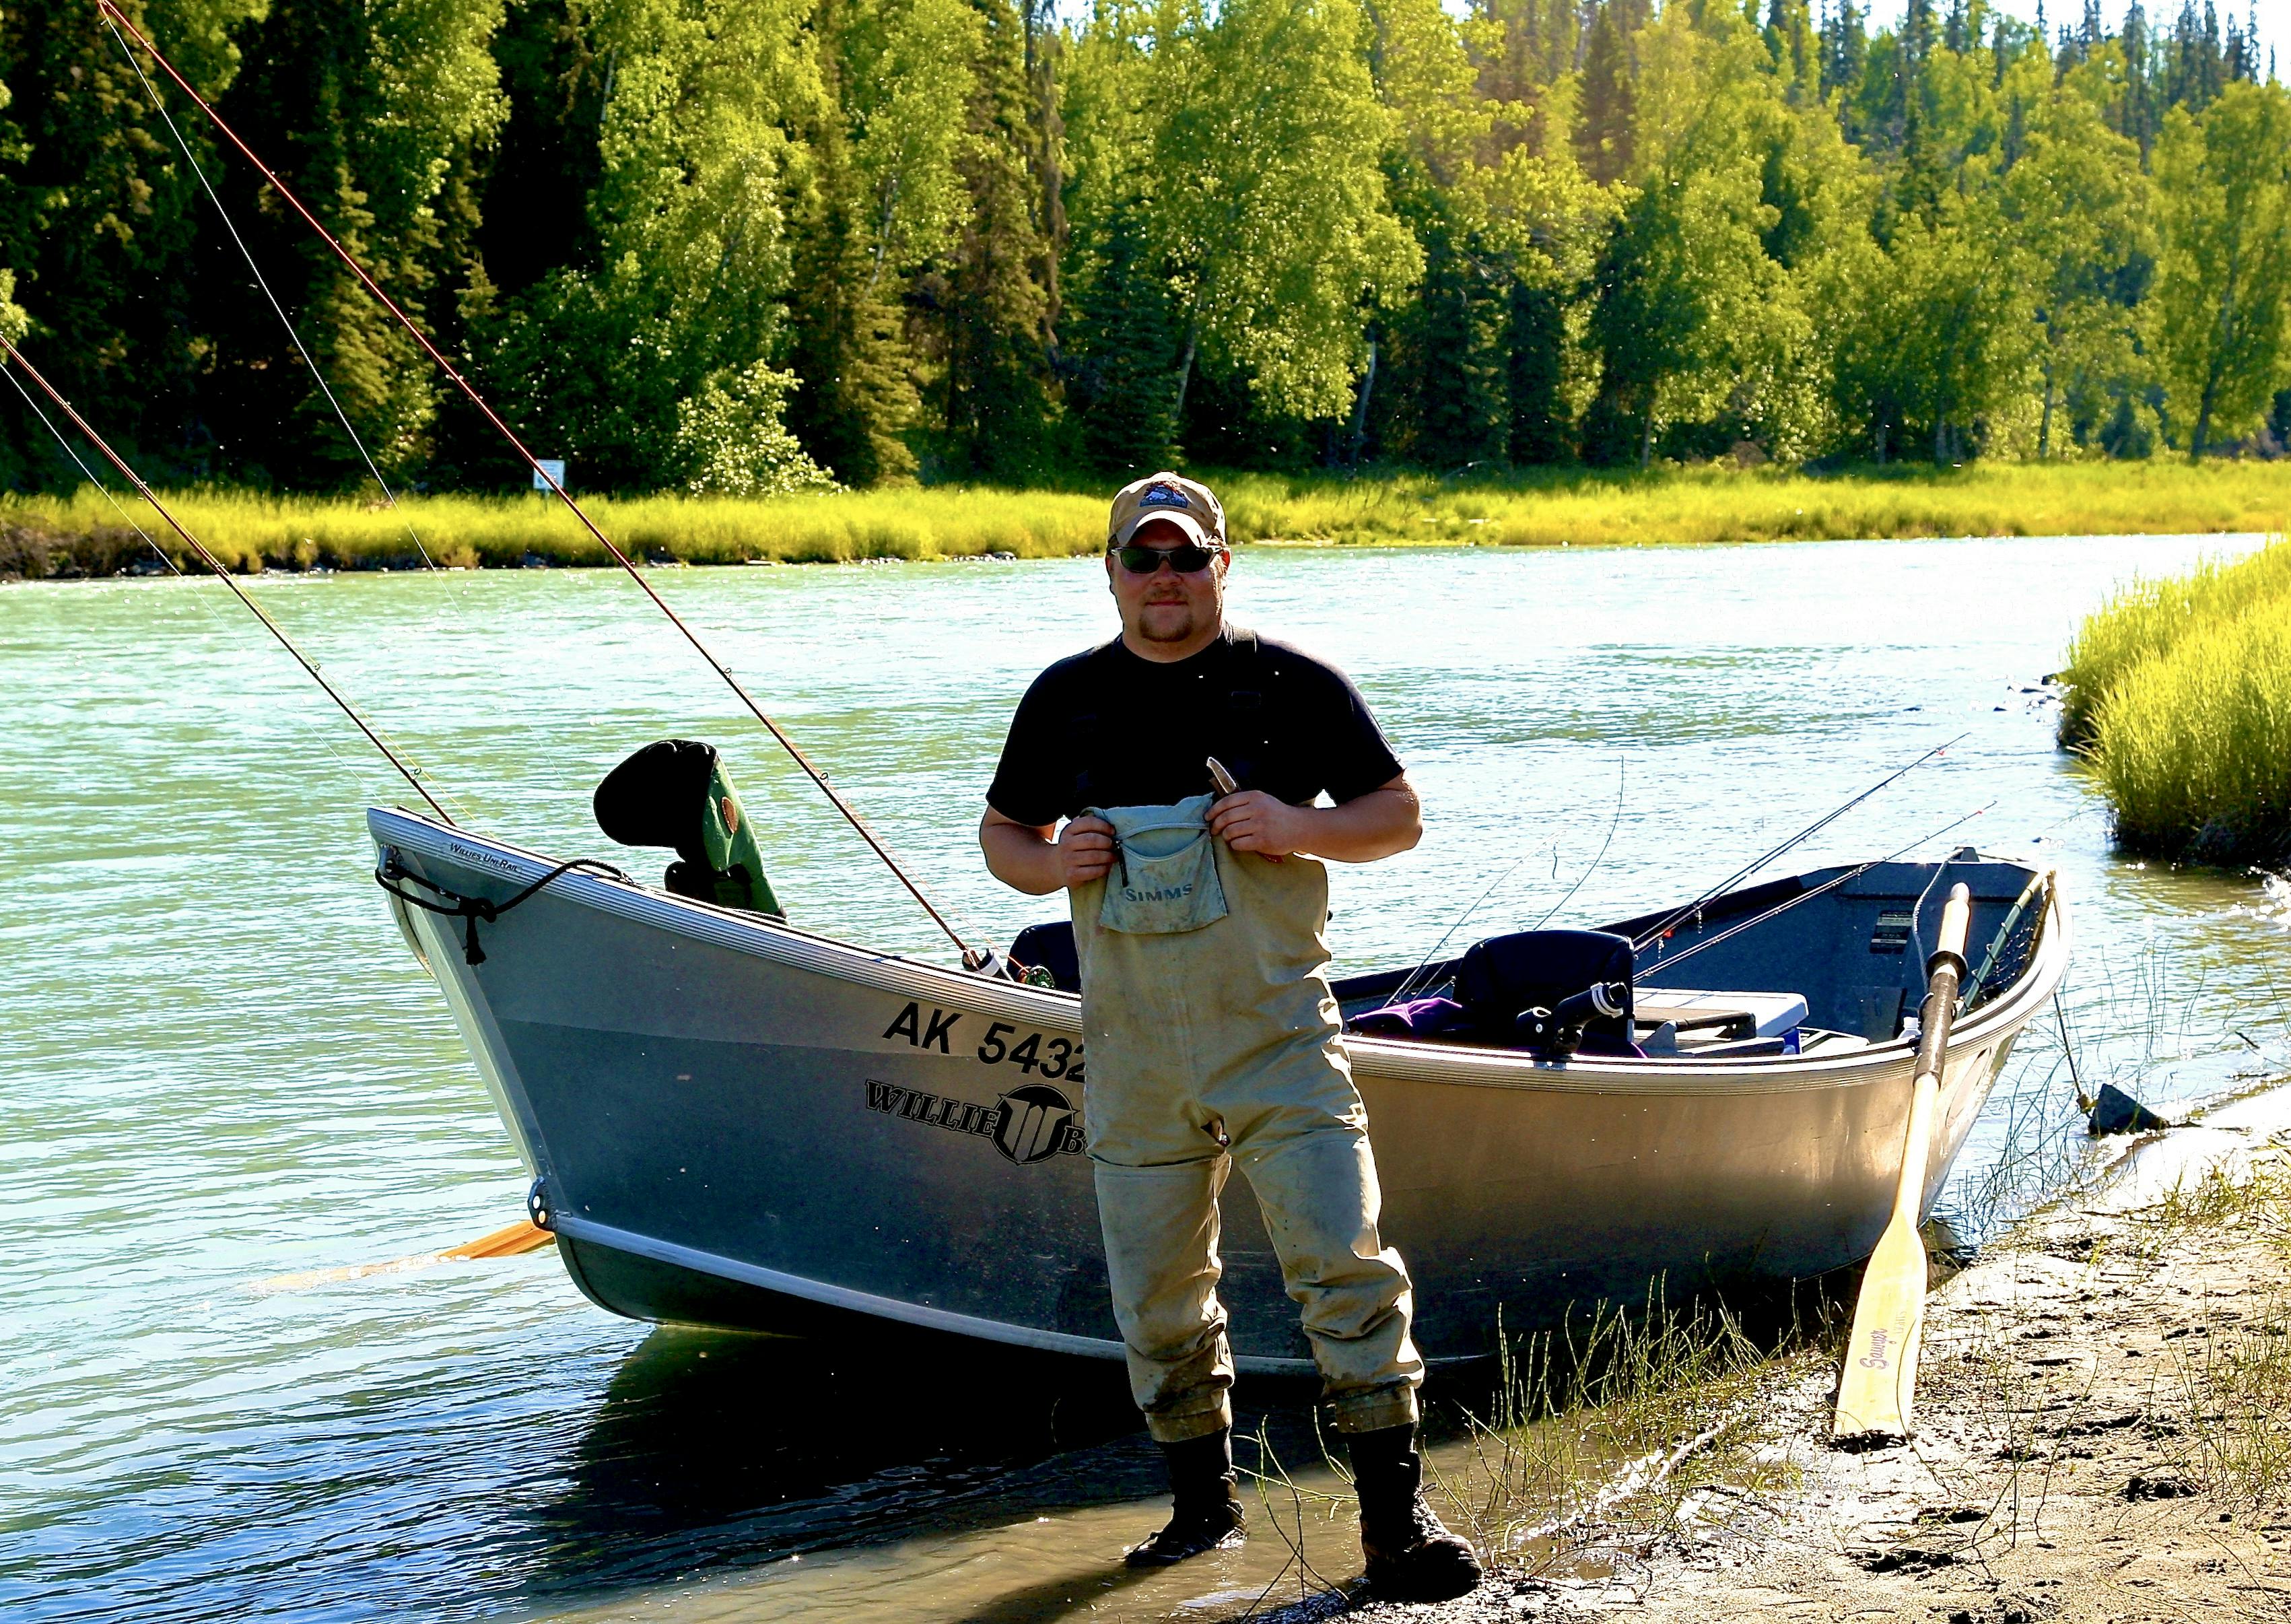 Guided fresh water fishing trip by Drift boat on glacier-fed river